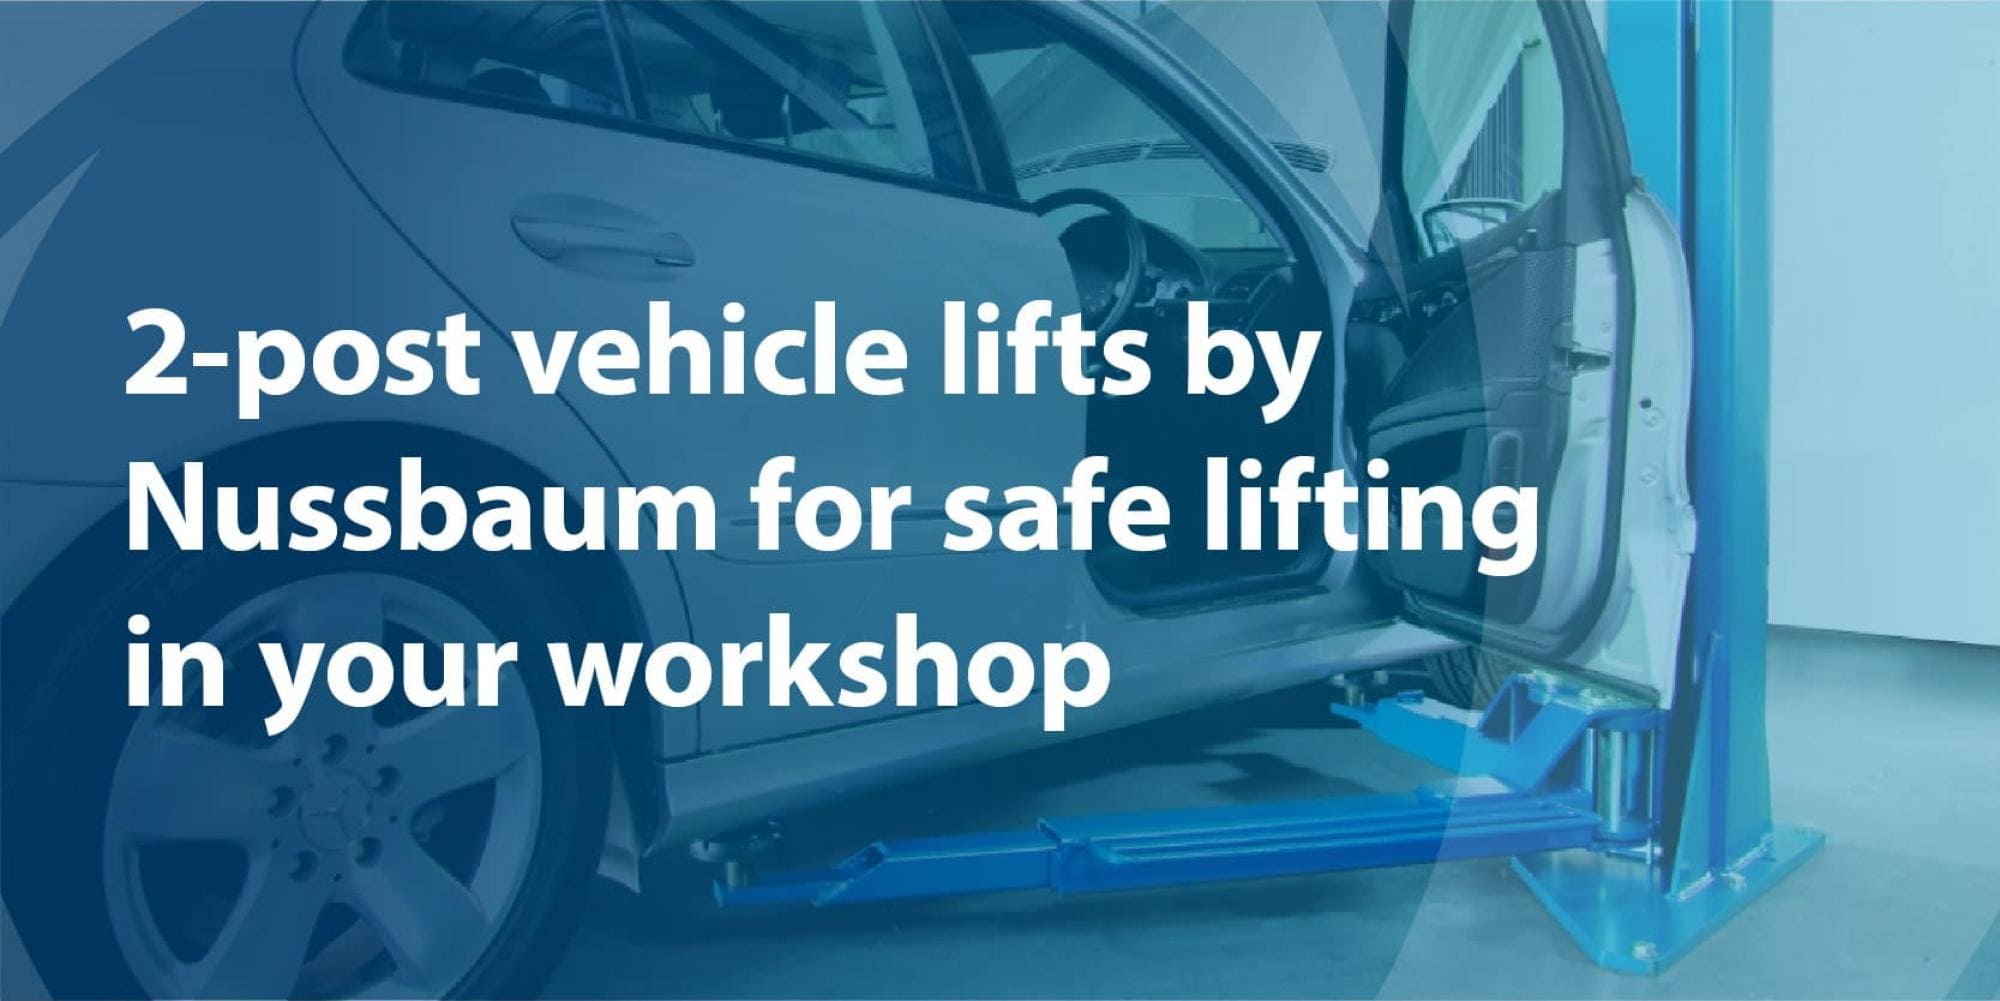 Nussbaum Smart Lift vehicle lift series, supplied, installed & maintained by CCS Garage Equipment